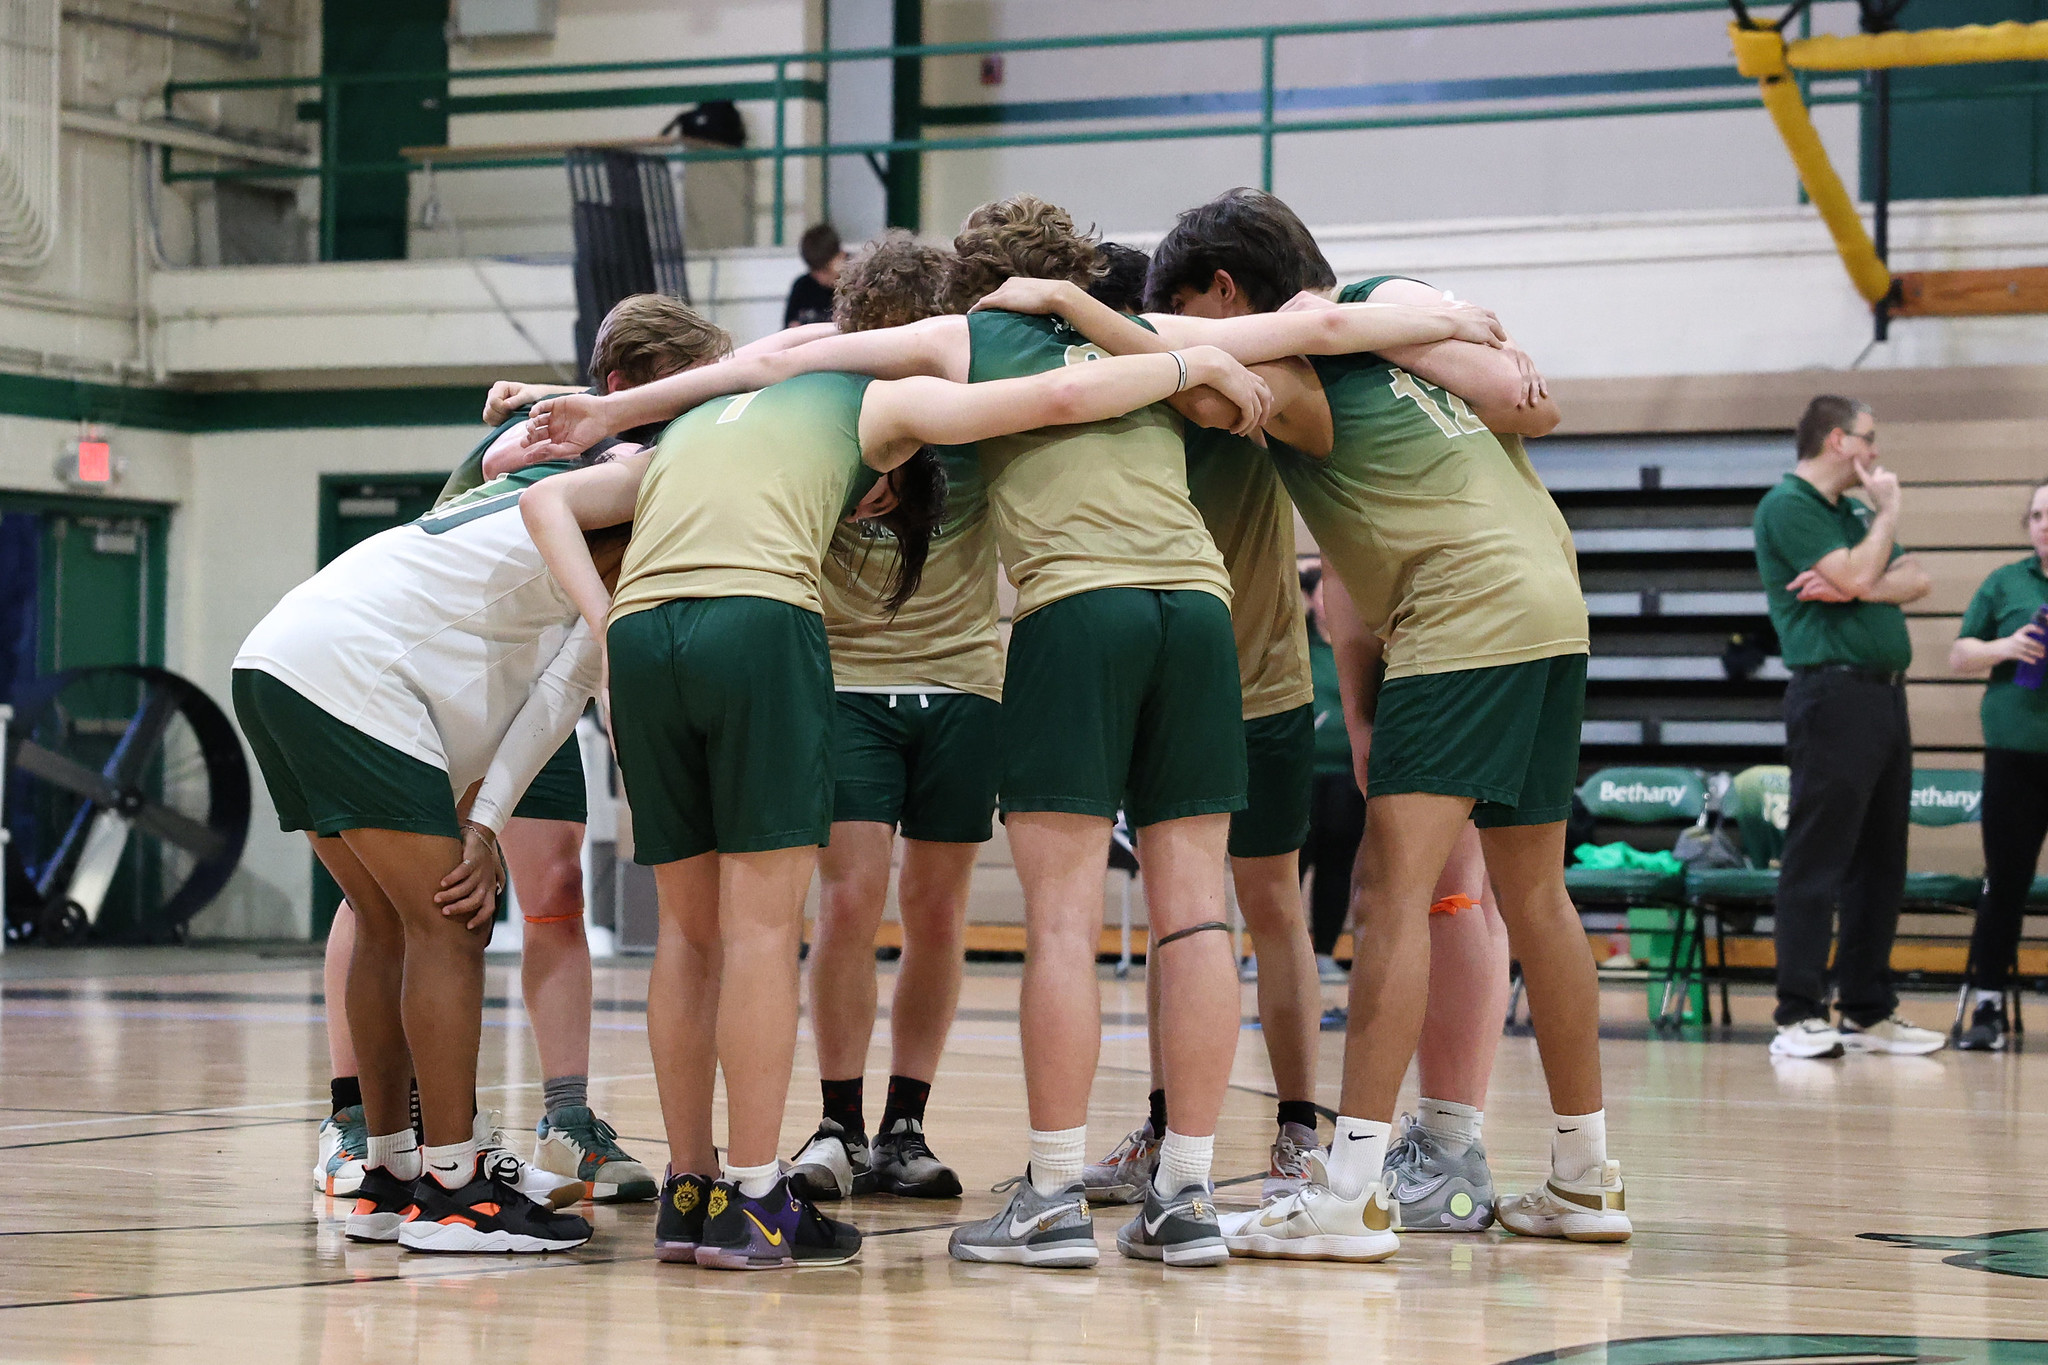 Men's Volleyball: Bison Finish First Ever Season in Program History